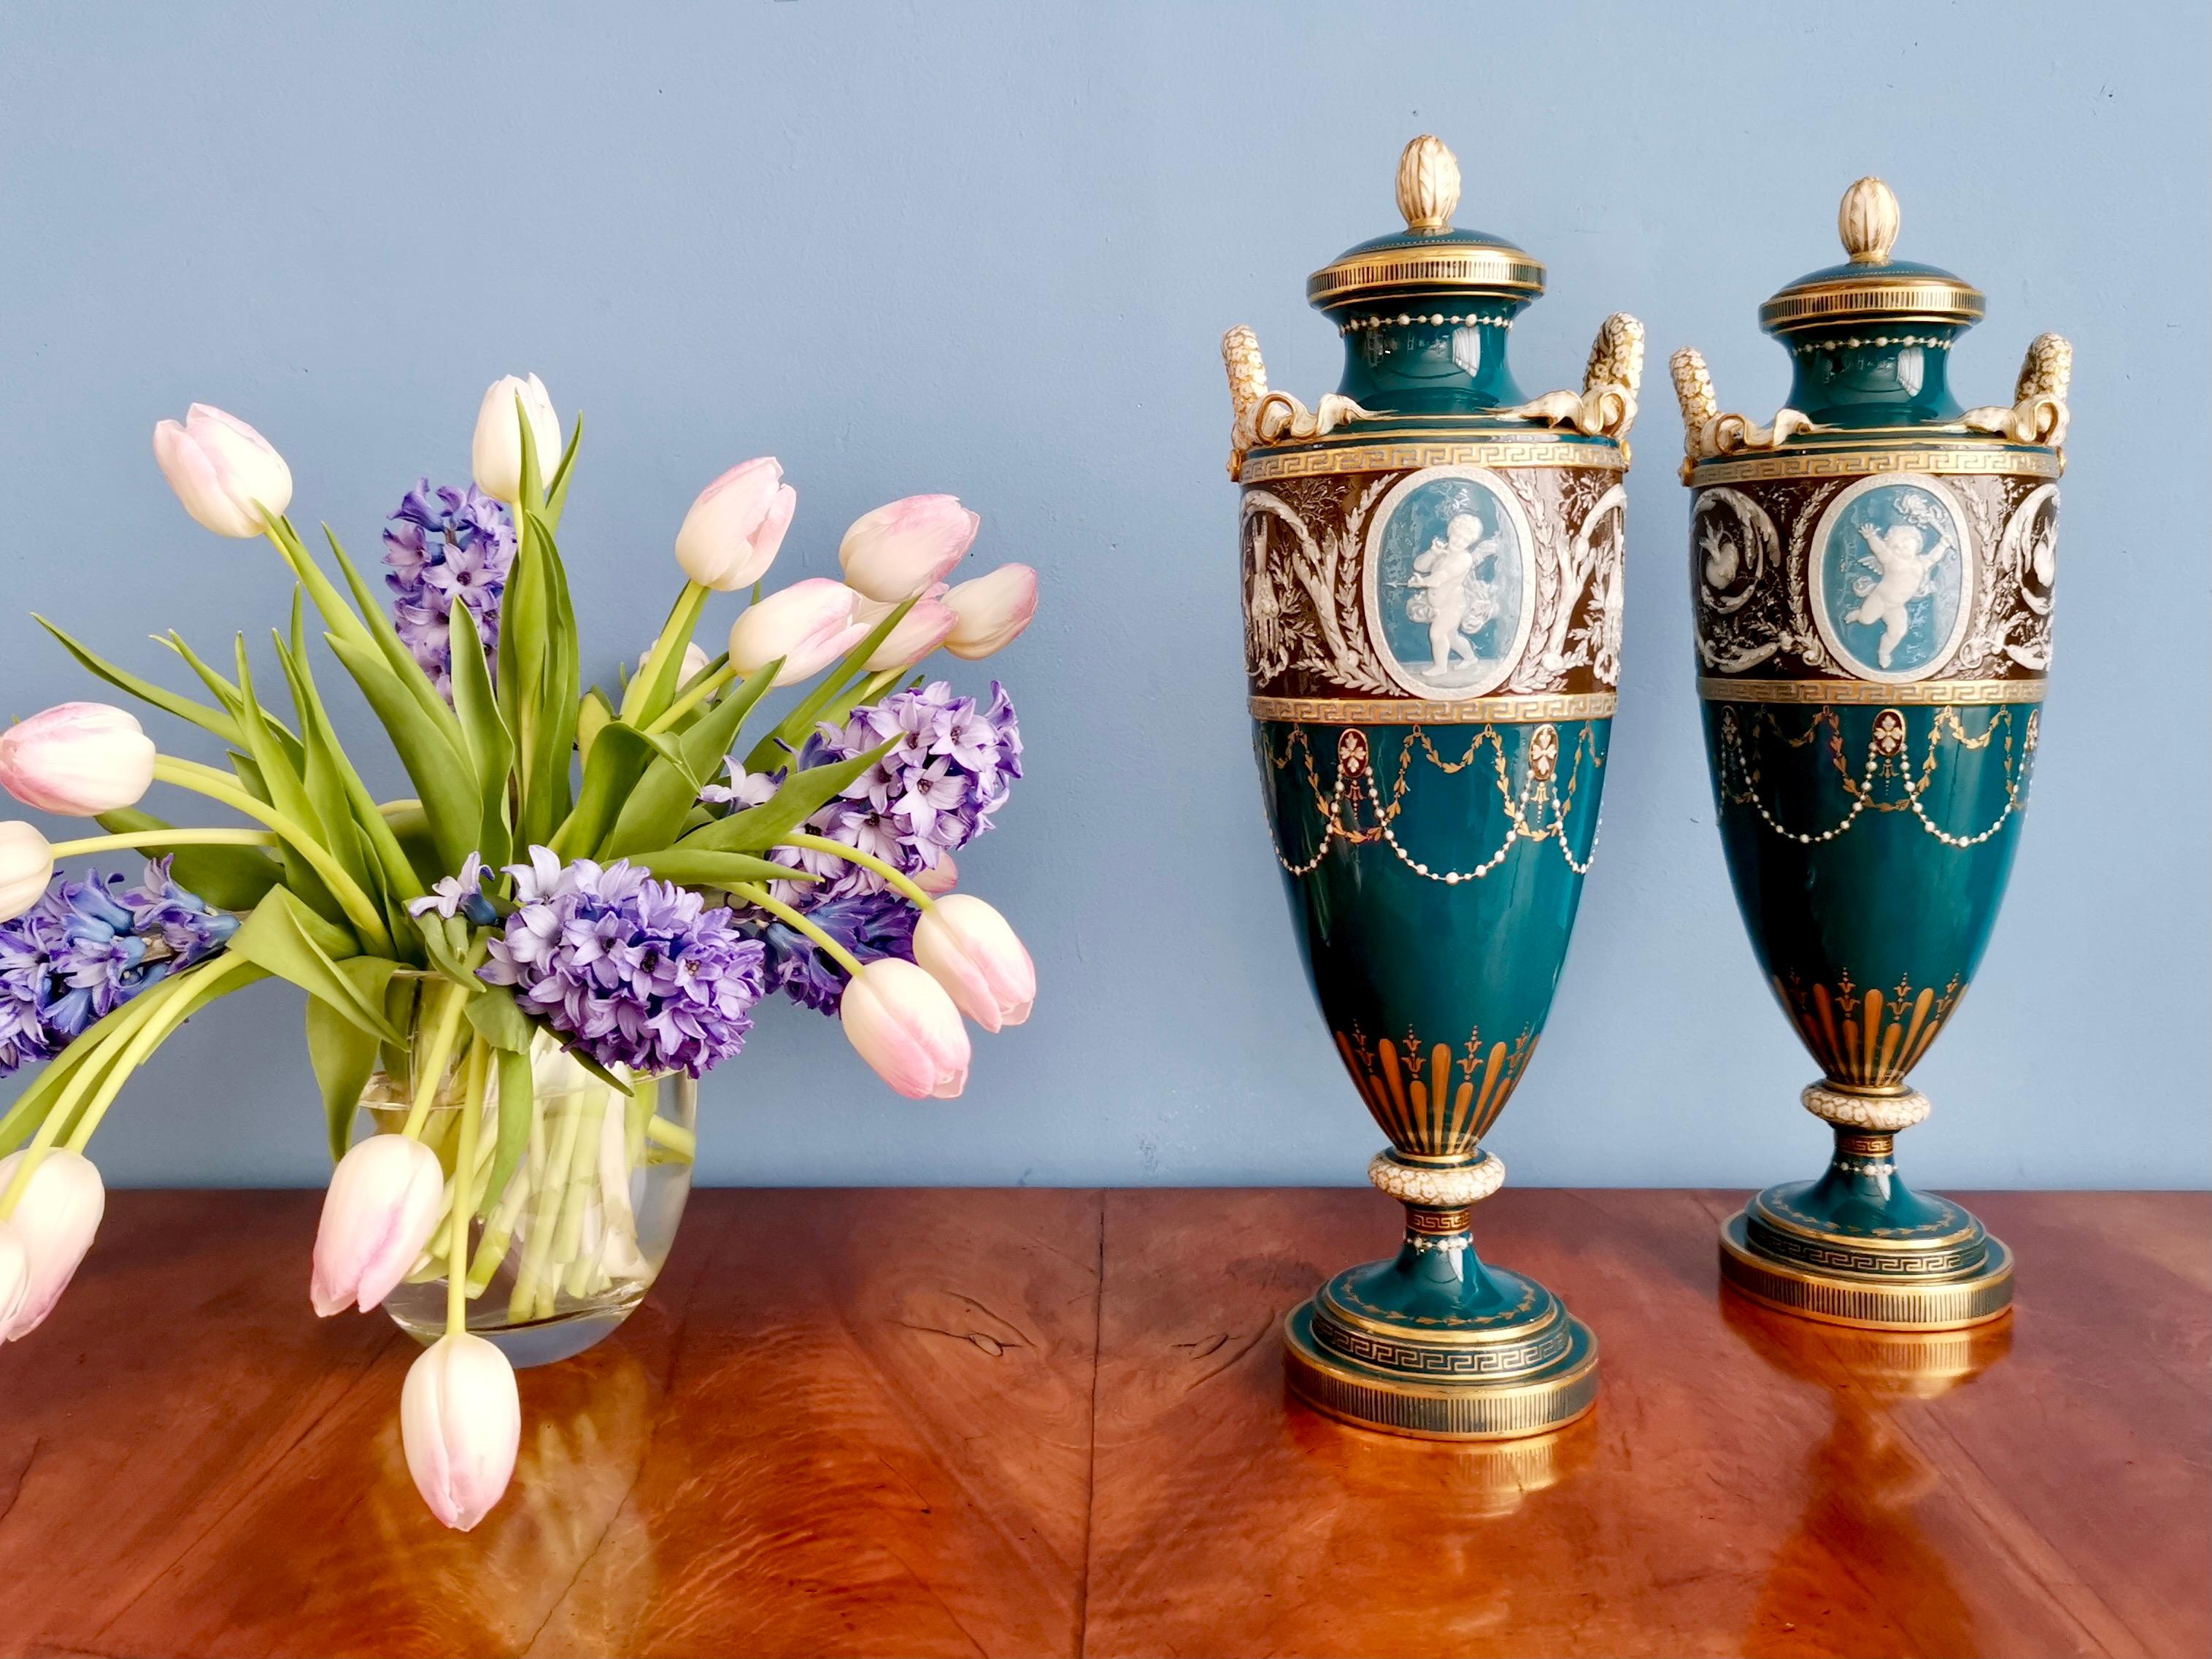 On offer is a sublime and rare pair of vases or urns with covers, made by Minton between 1873 and 1891, which was the Victorian era. The vases have a tall and slender shape and sublime pâte-sur-pâte decorations by Harry Hollins, who worked with the